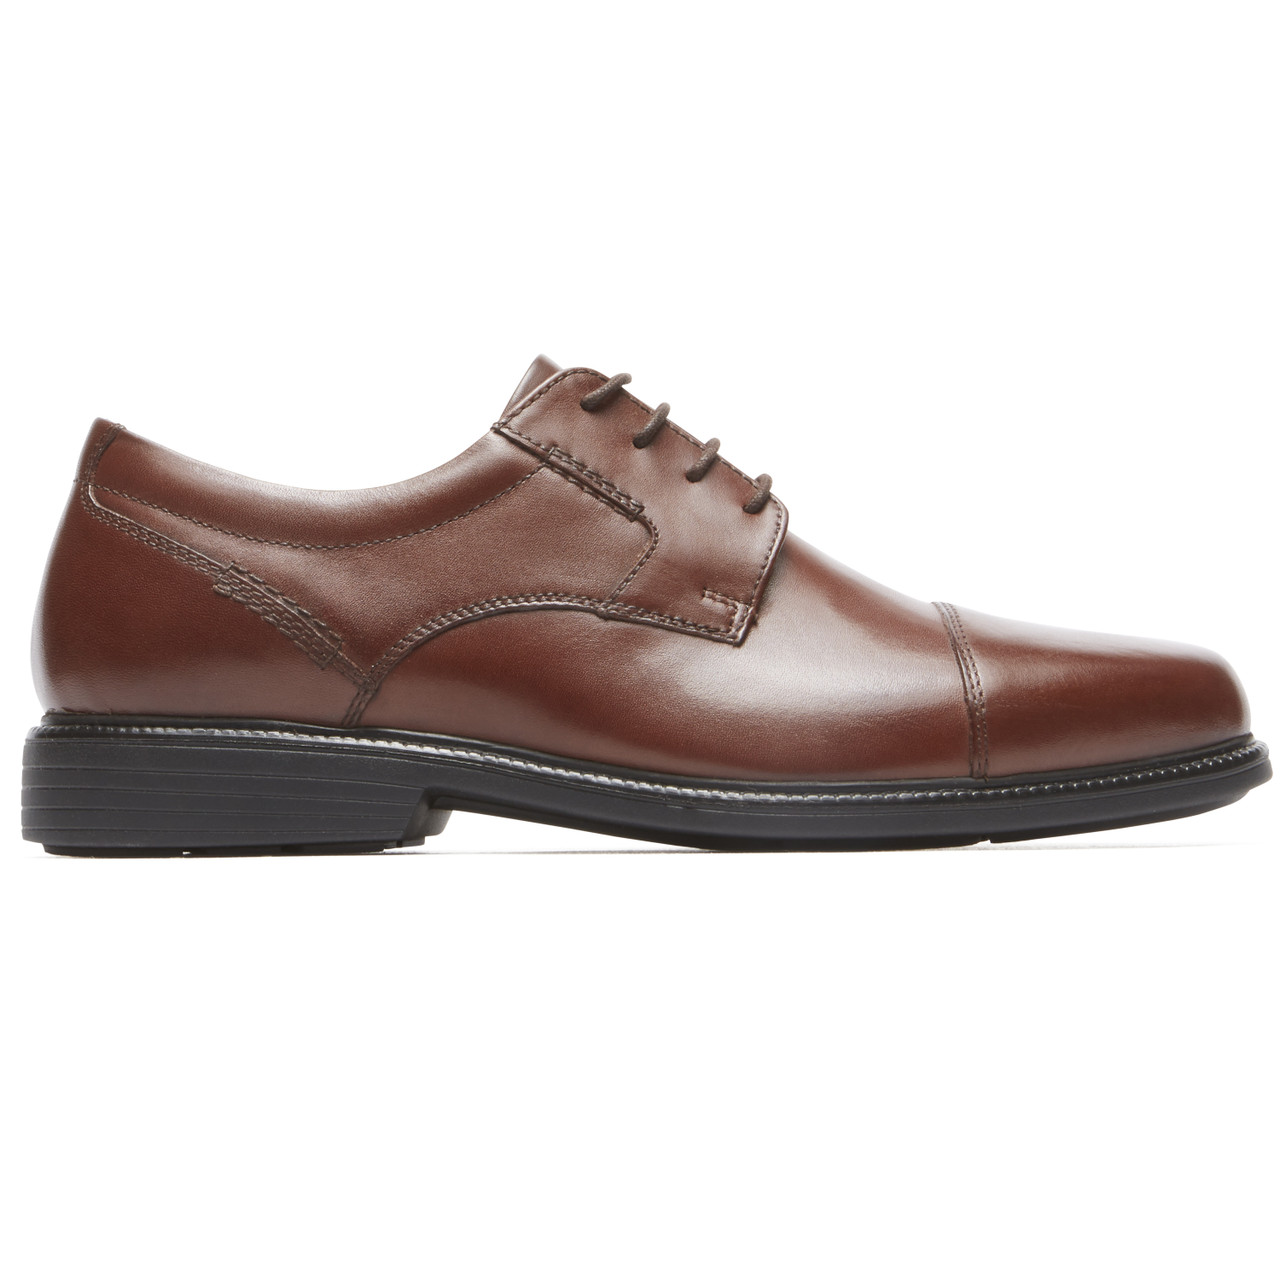 Rockport Men's Charles Road Cap Toe Oxford Style V80557 - Right Foot Shoes